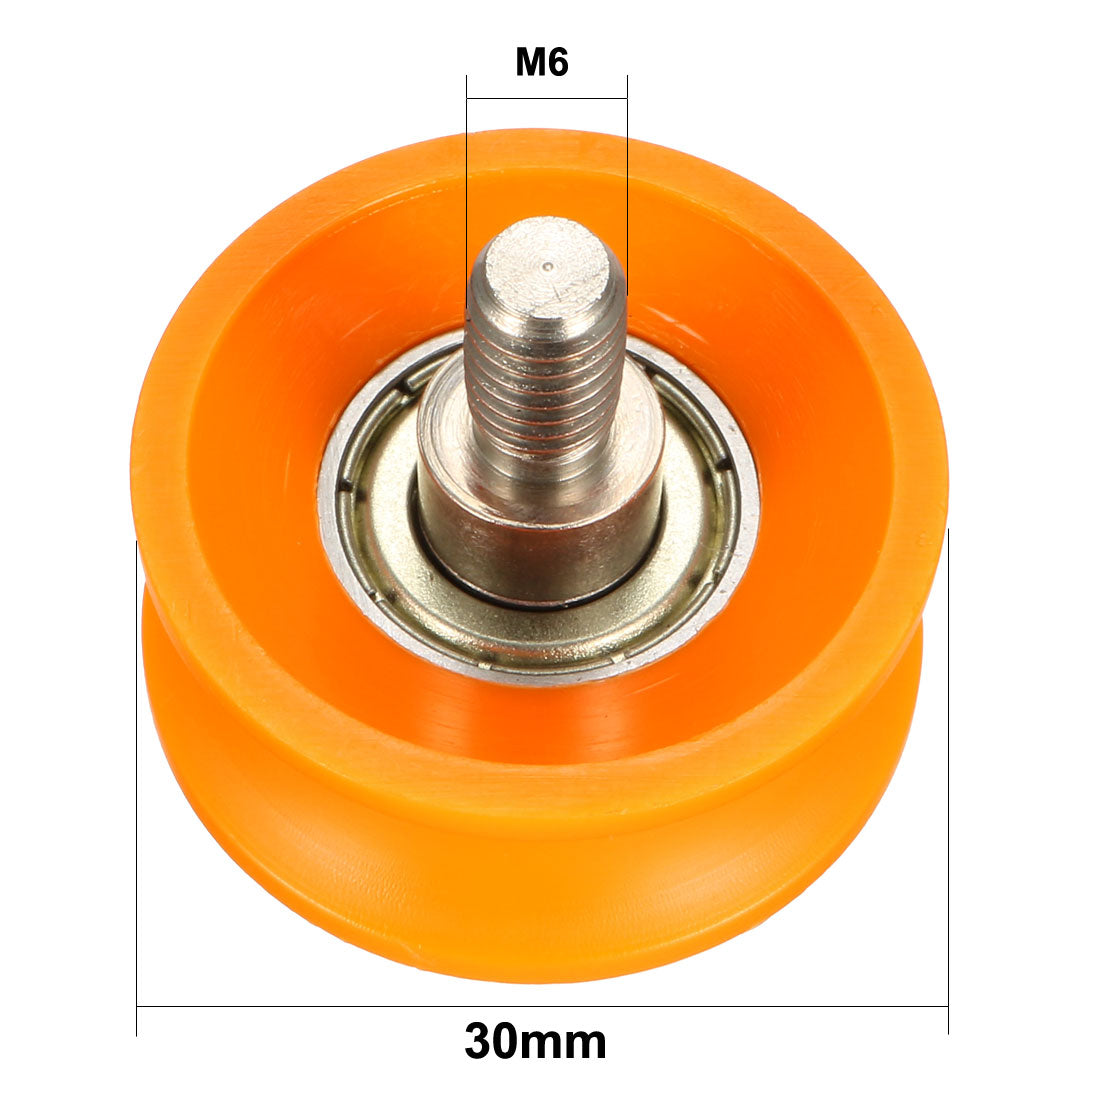 uxcell Uxcell 3mm Deep Metal V Groove Threaded Rod Track Guide Bearing Pulley Wheel Orange 30x13mm 4pcs